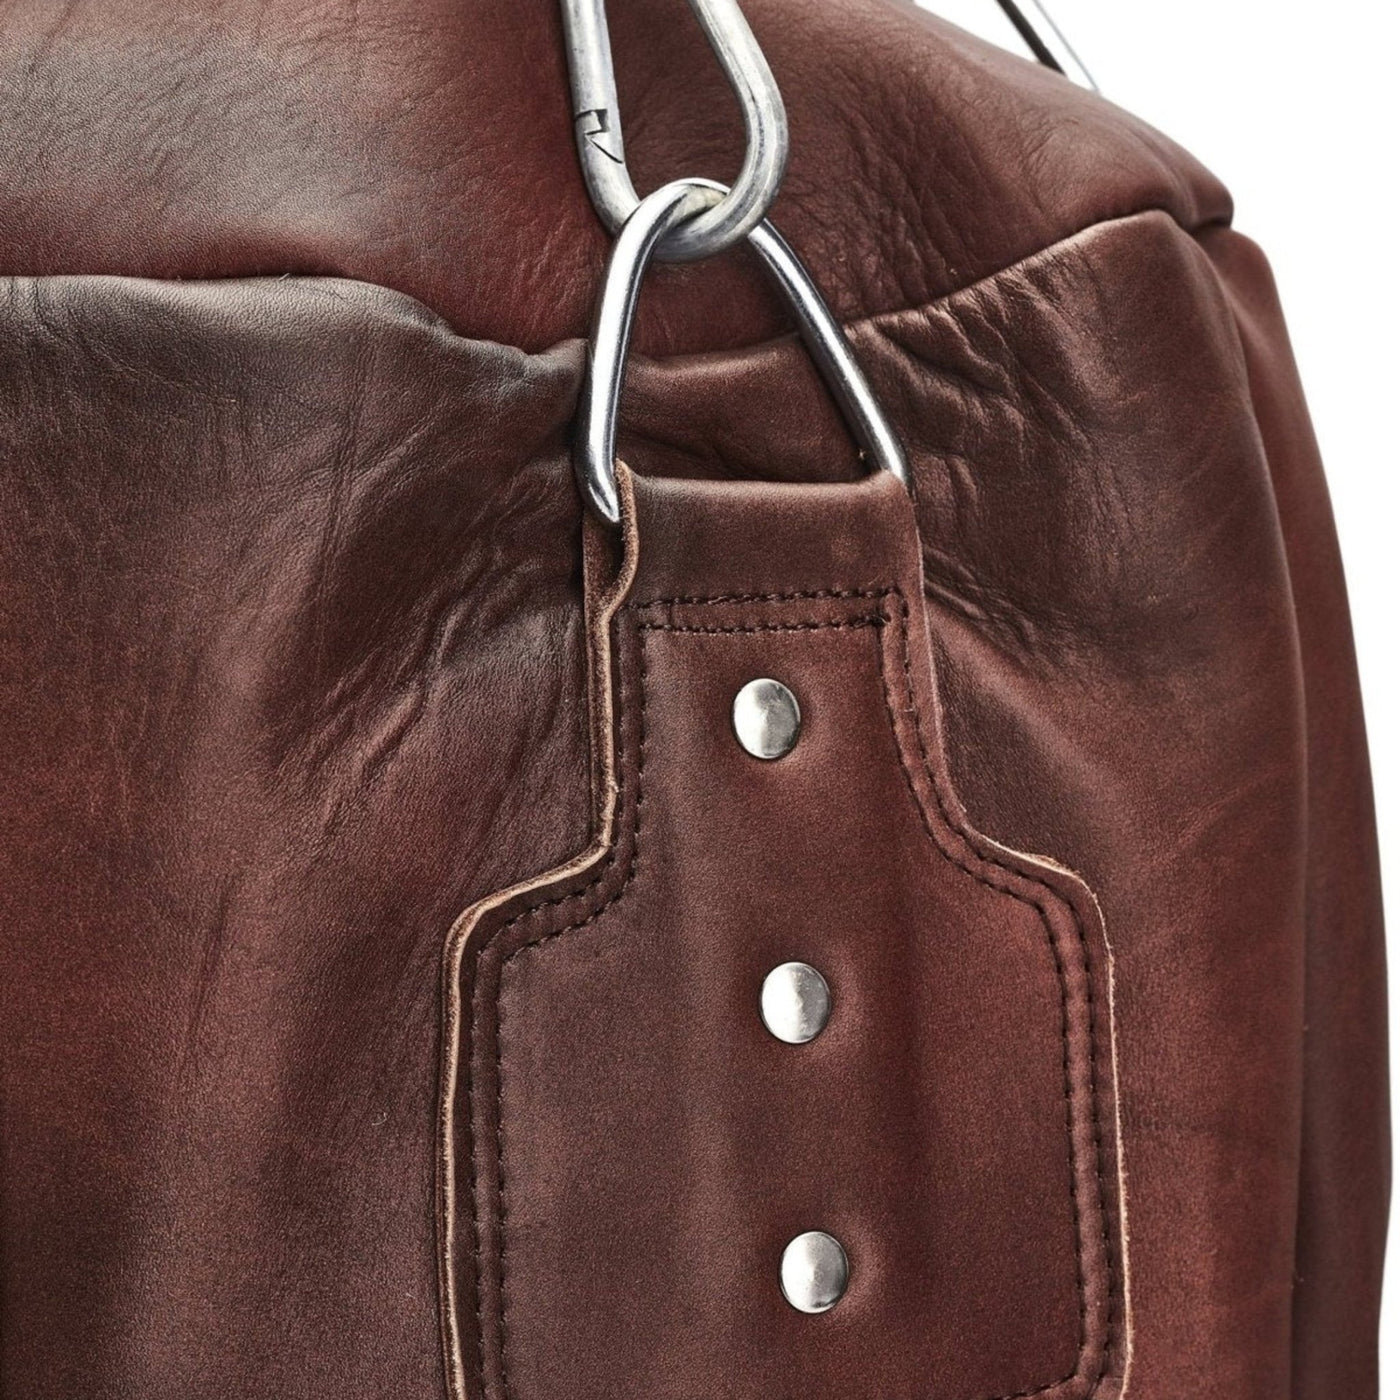 PRO Heritage Brown Uppercut Bag Leather Boxing Package (Strap Up) - MODEST VINTAGE PLAYER LTD